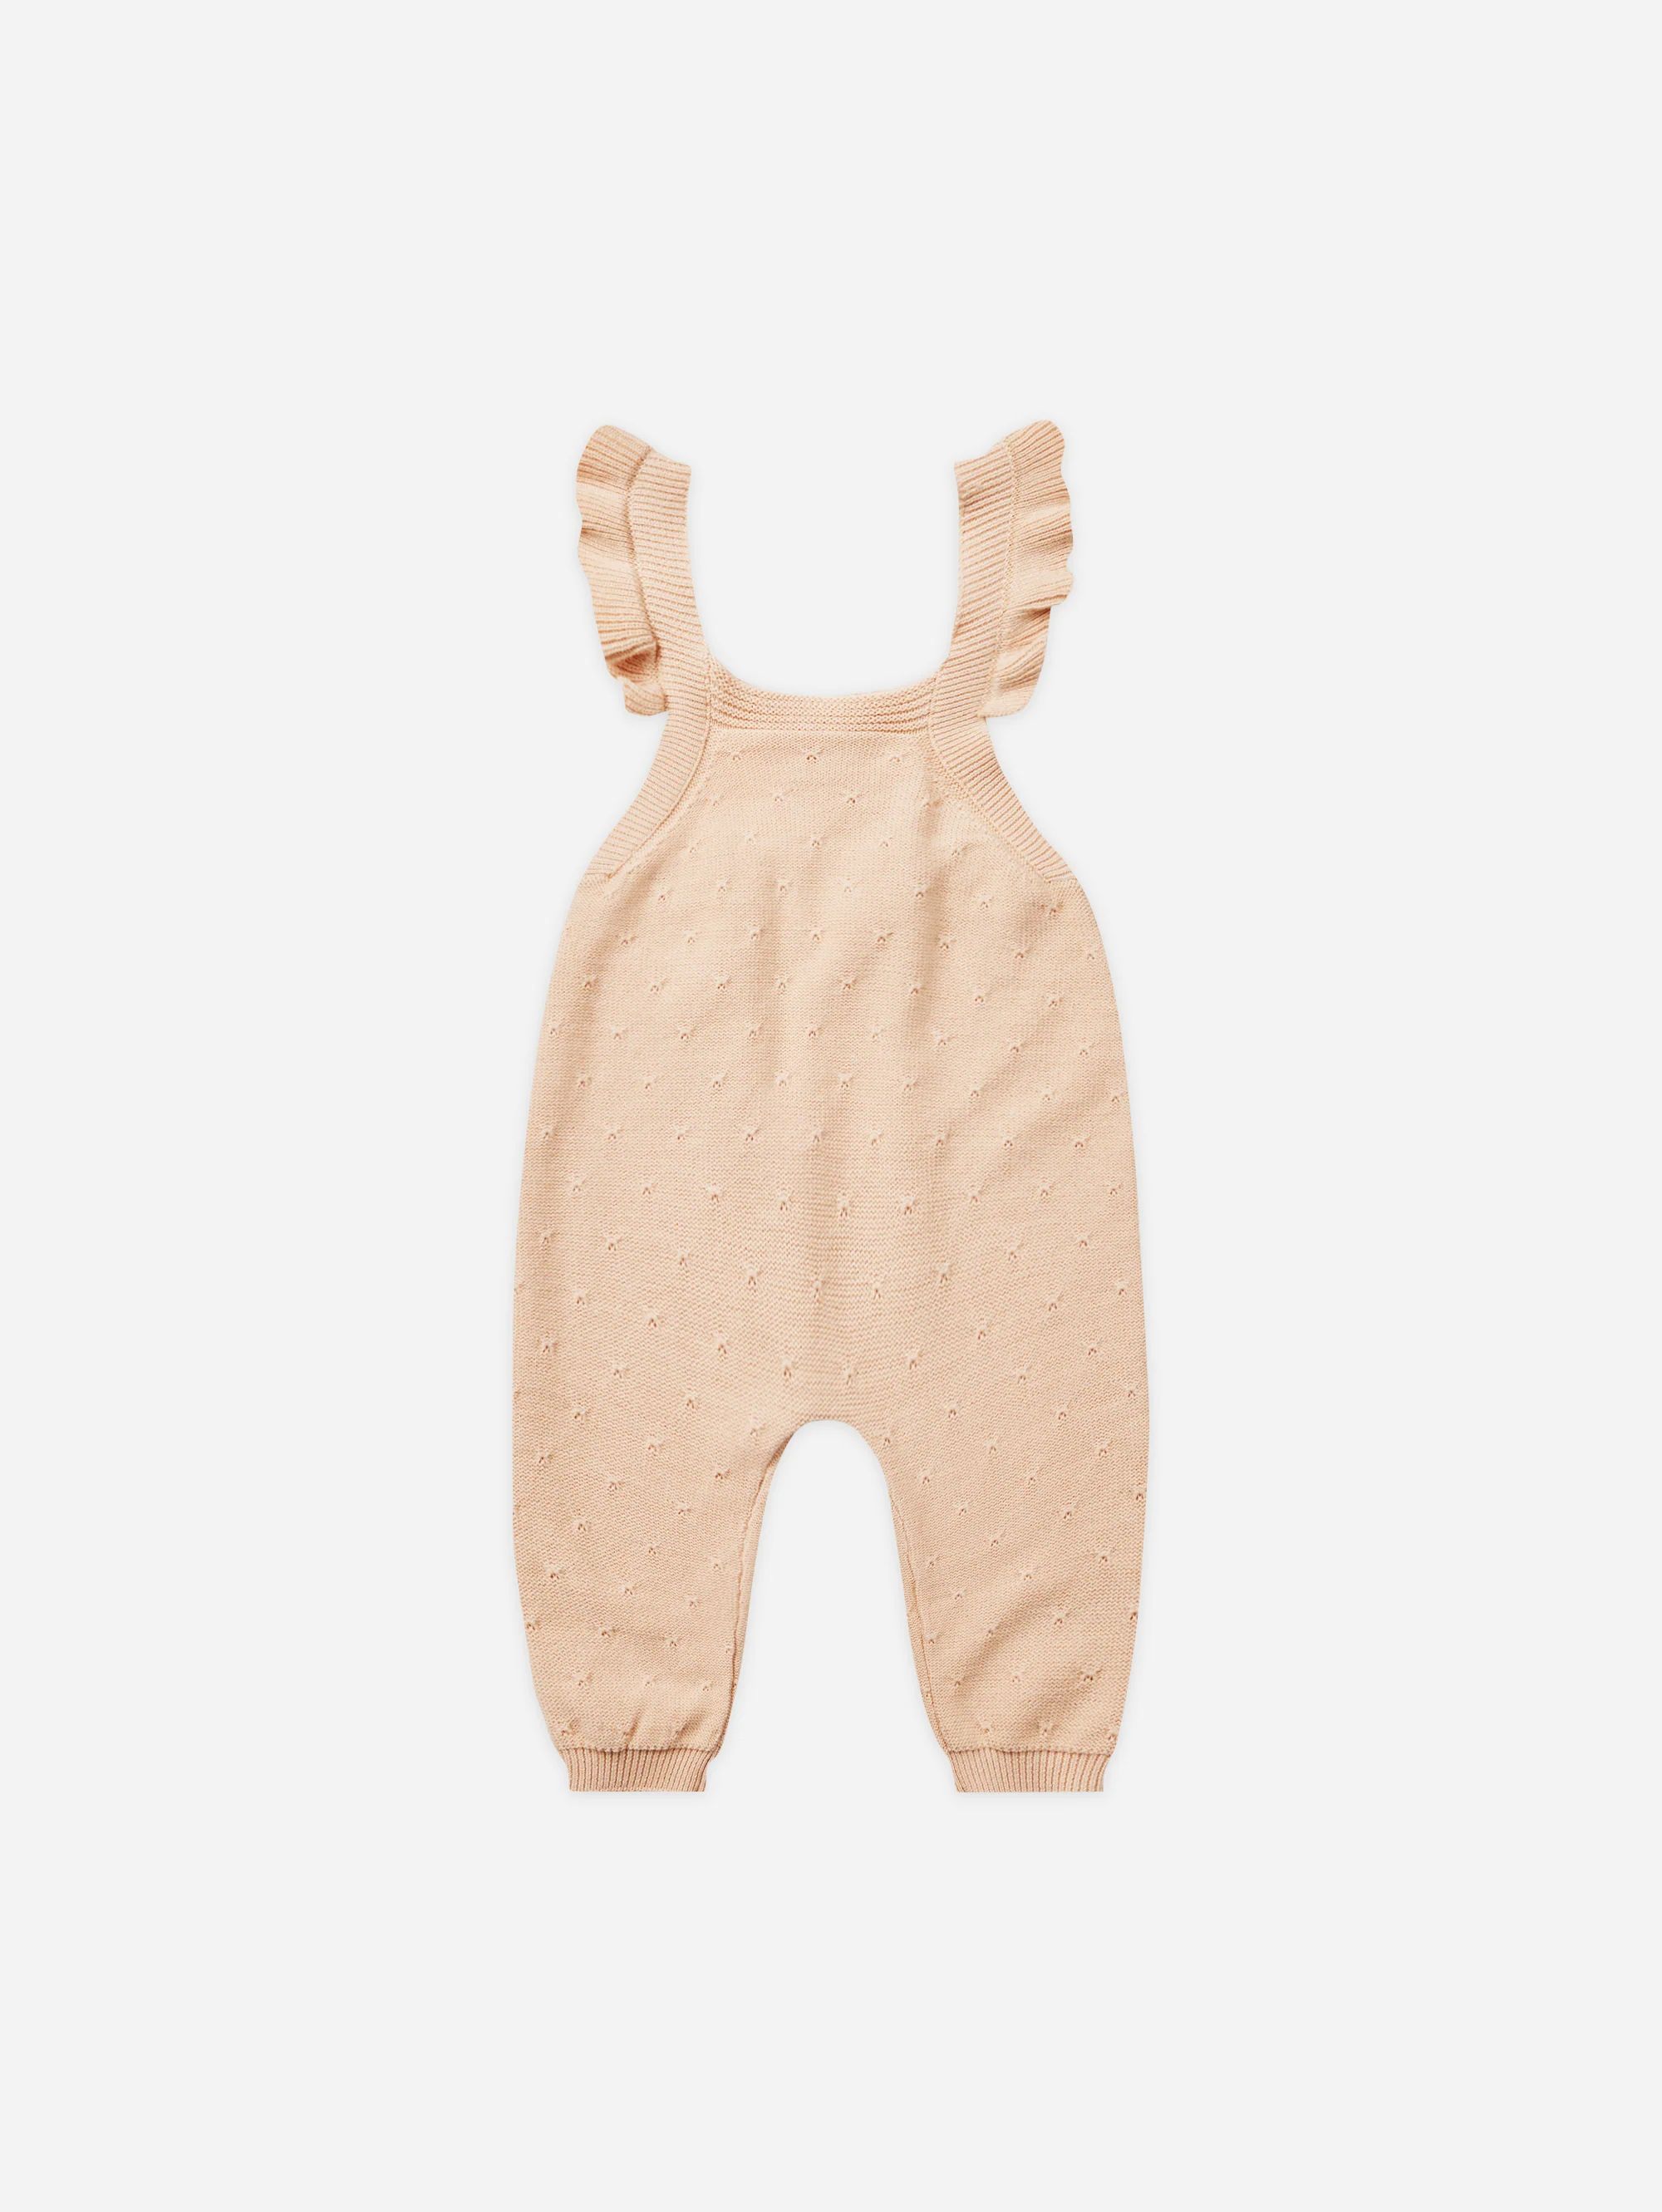 Pointelle Knit Overalls || Shell | Rylee + Cru